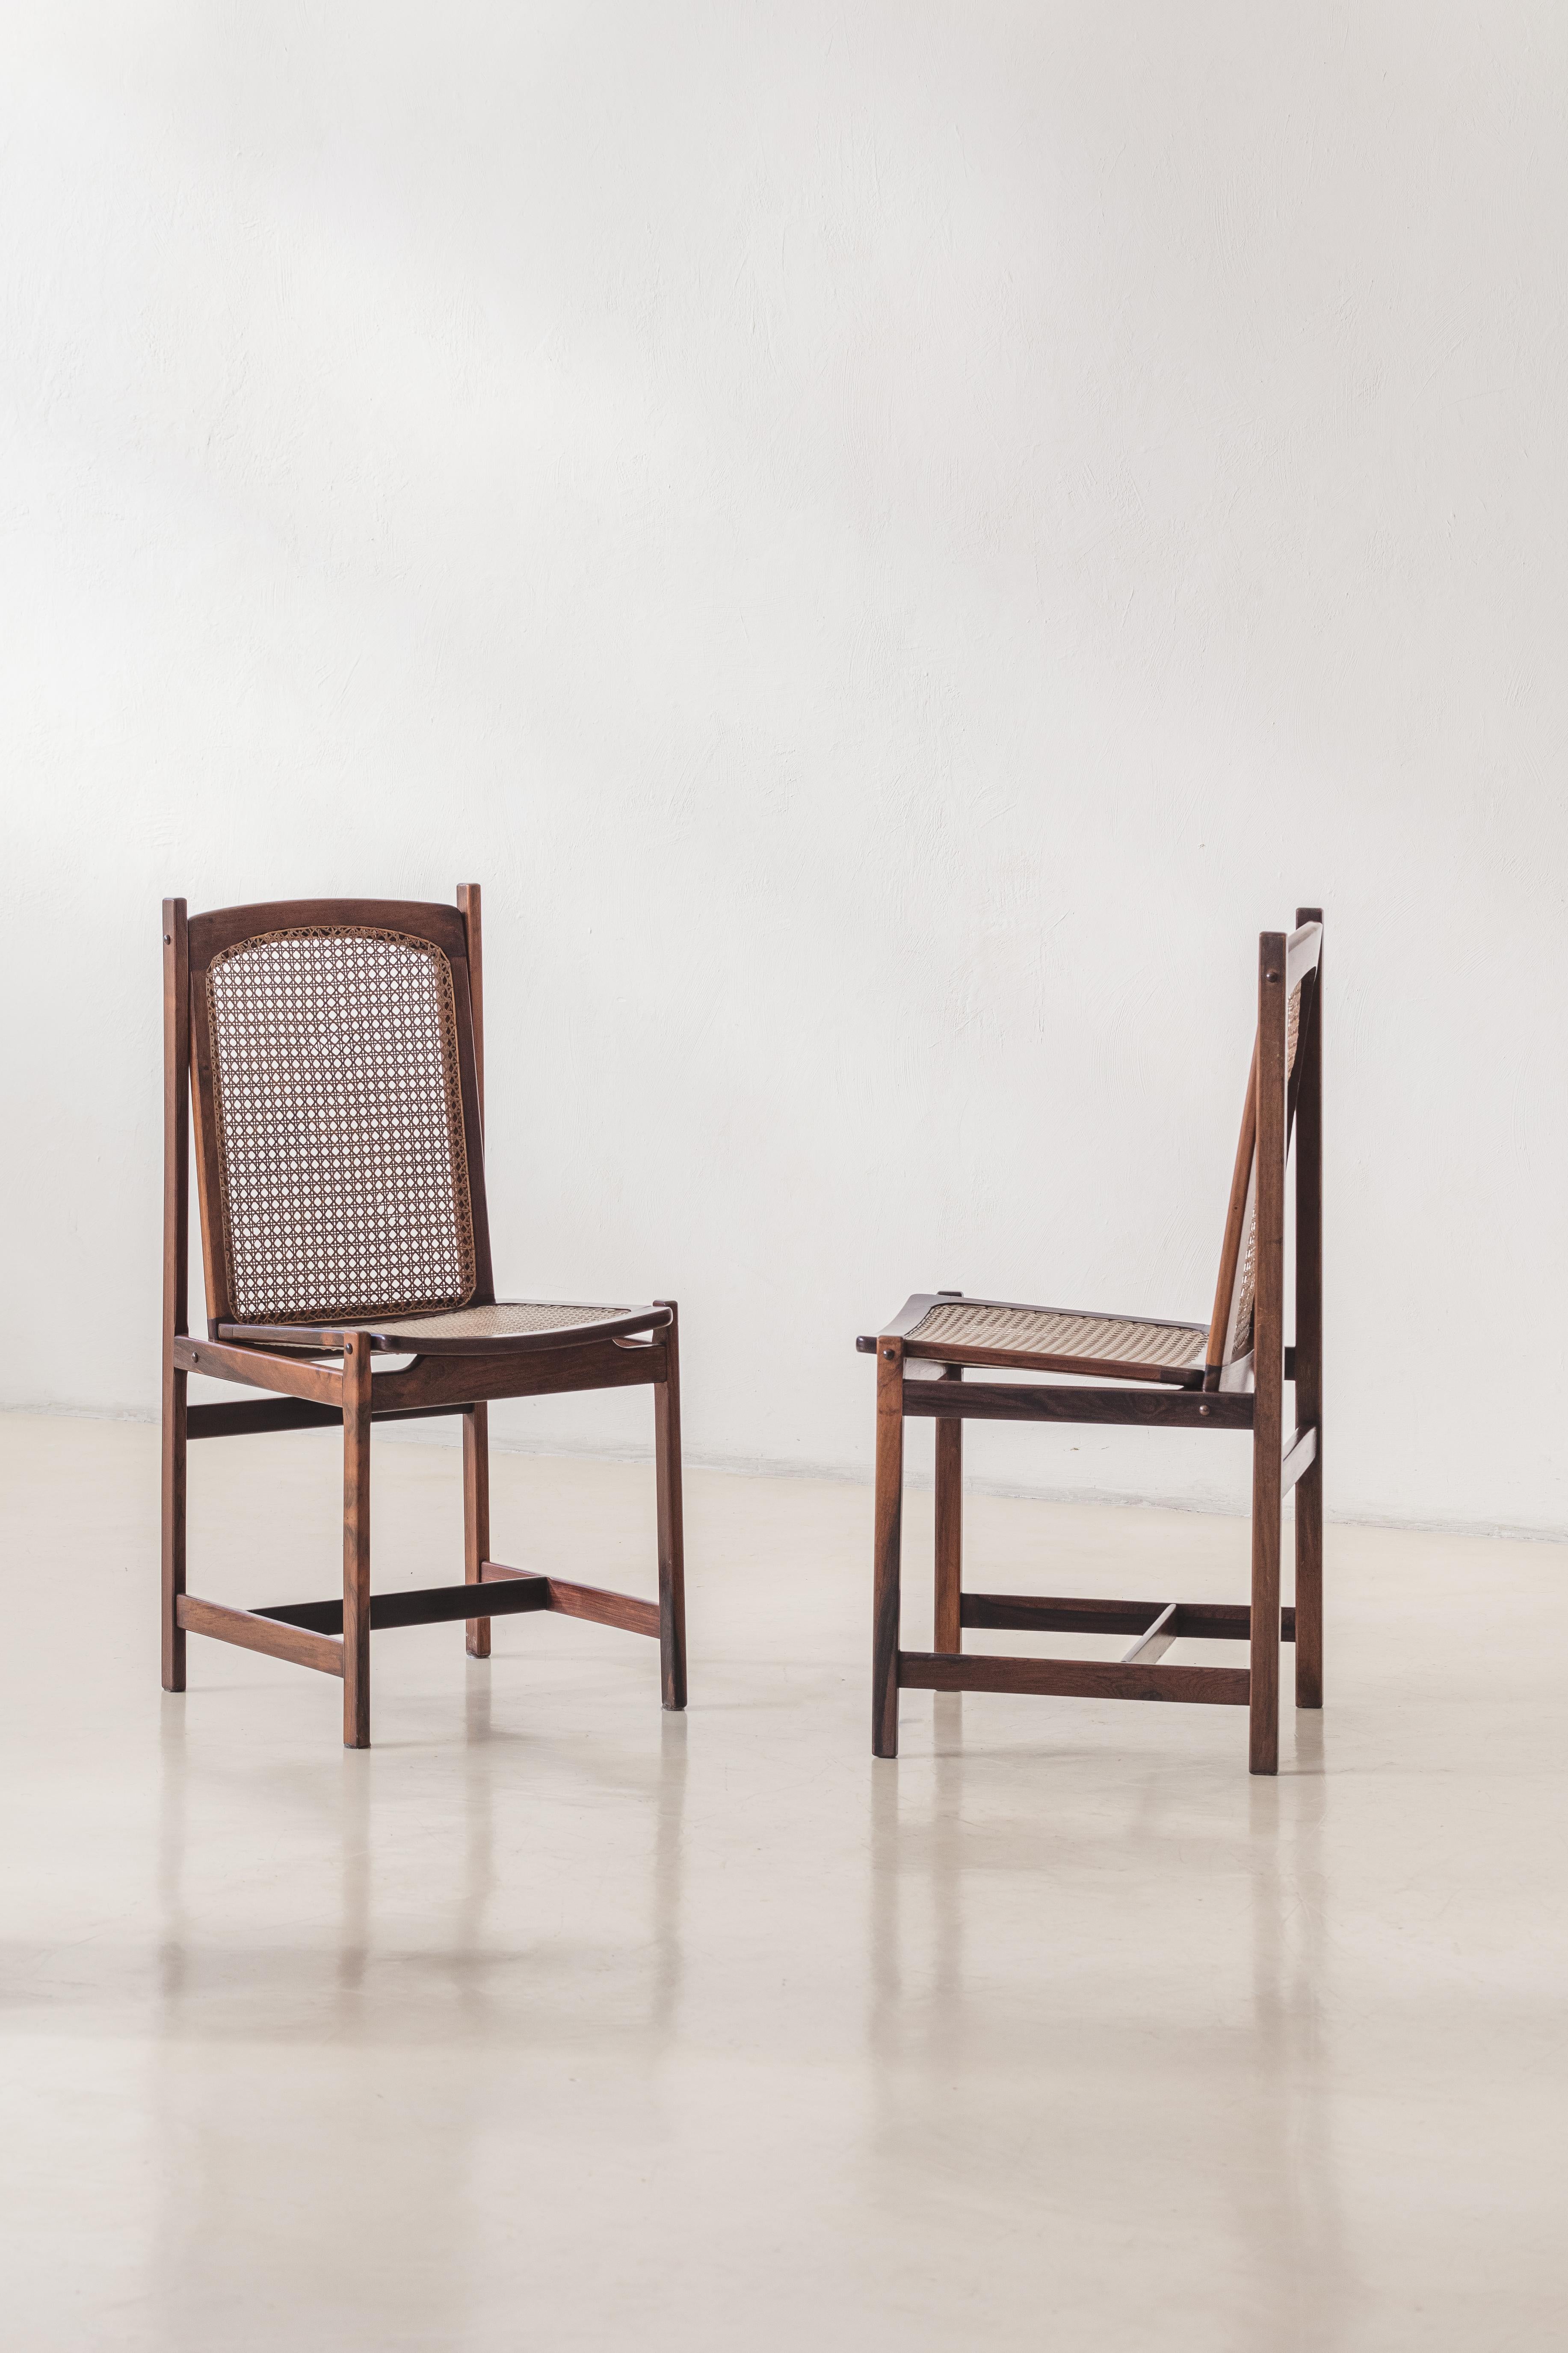 Wood Celina Decorações Set of Six Dining Chairs, Rosewood and Cane, Midcentury 1960s For Sale